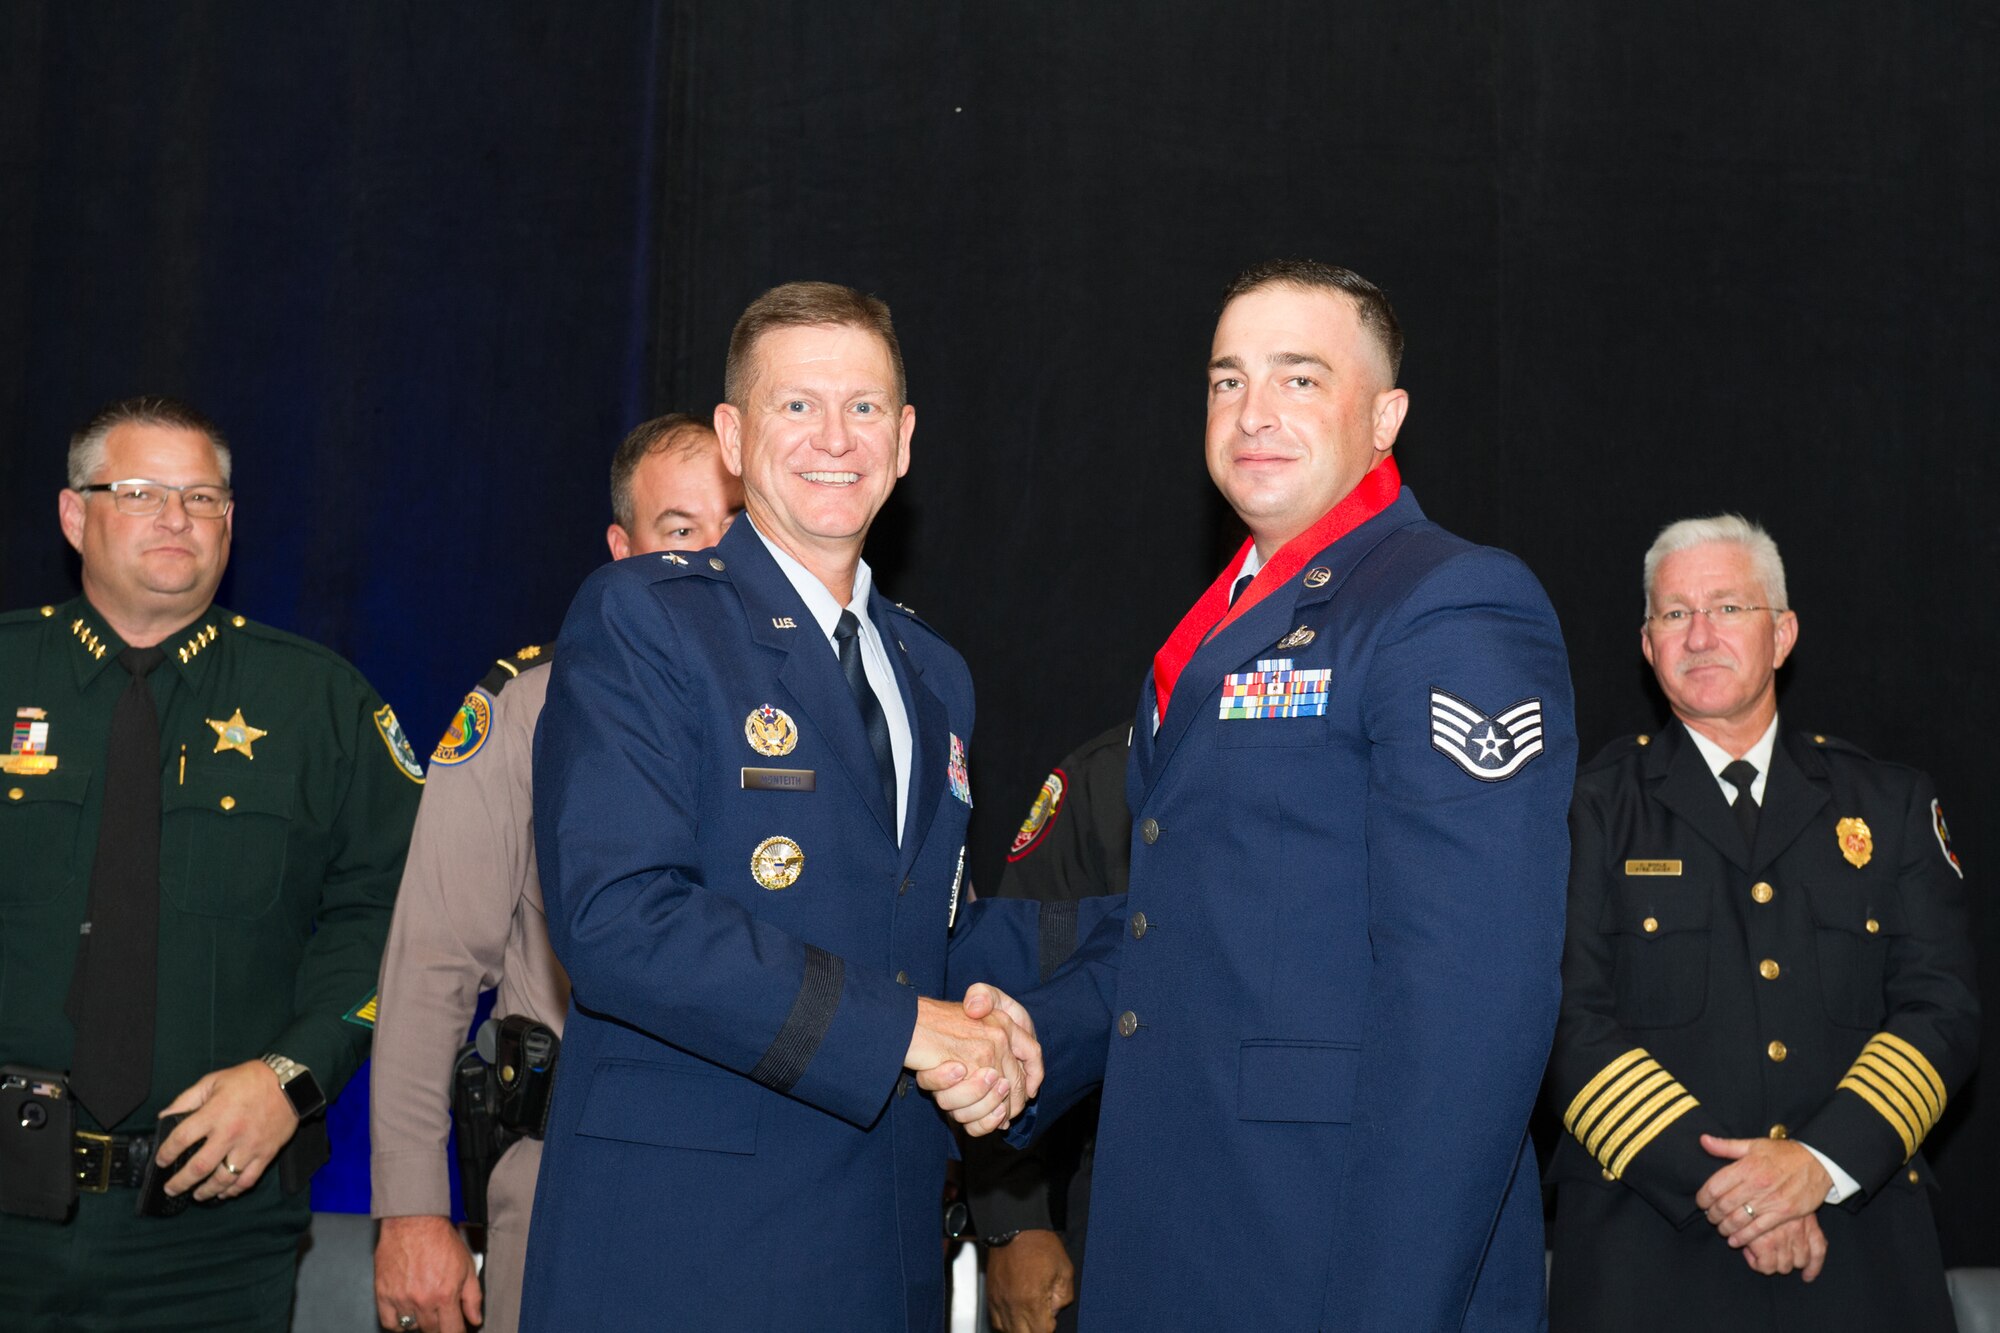 Brig. Gen. Wayne Monteith, 45th Space Wing commander, assists the Melbourne Regional Chamber of East Central Florida with the presentation of the Life Saving Medal to Staff Sgt Michael Hempill, of the 45th Space Wing Civil Engineer Squadron, at the chamber’s Valor Awards banquet on Aug. 17, 2016.  While off duty and fishing at Patrick Air Force Base’s Outdoor Recreation on base area with family and friends Hemphill immediately responded to another family’s cry for help after a man fell out of his kayak. (U.S. Air Force photos/Benjamin Thacker/Released)